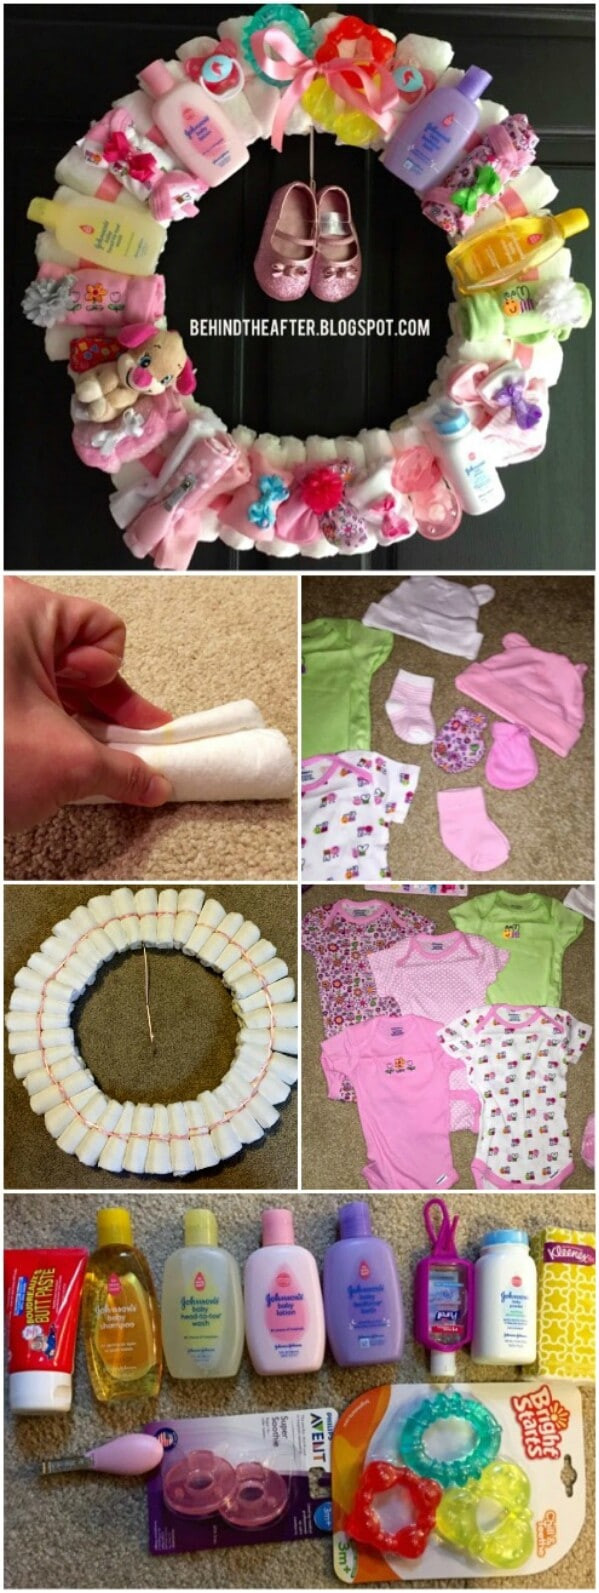 Baby Gift Ideas For Girls
 25 Enchantingly Adorable Baby Shower Gift Ideas That Will